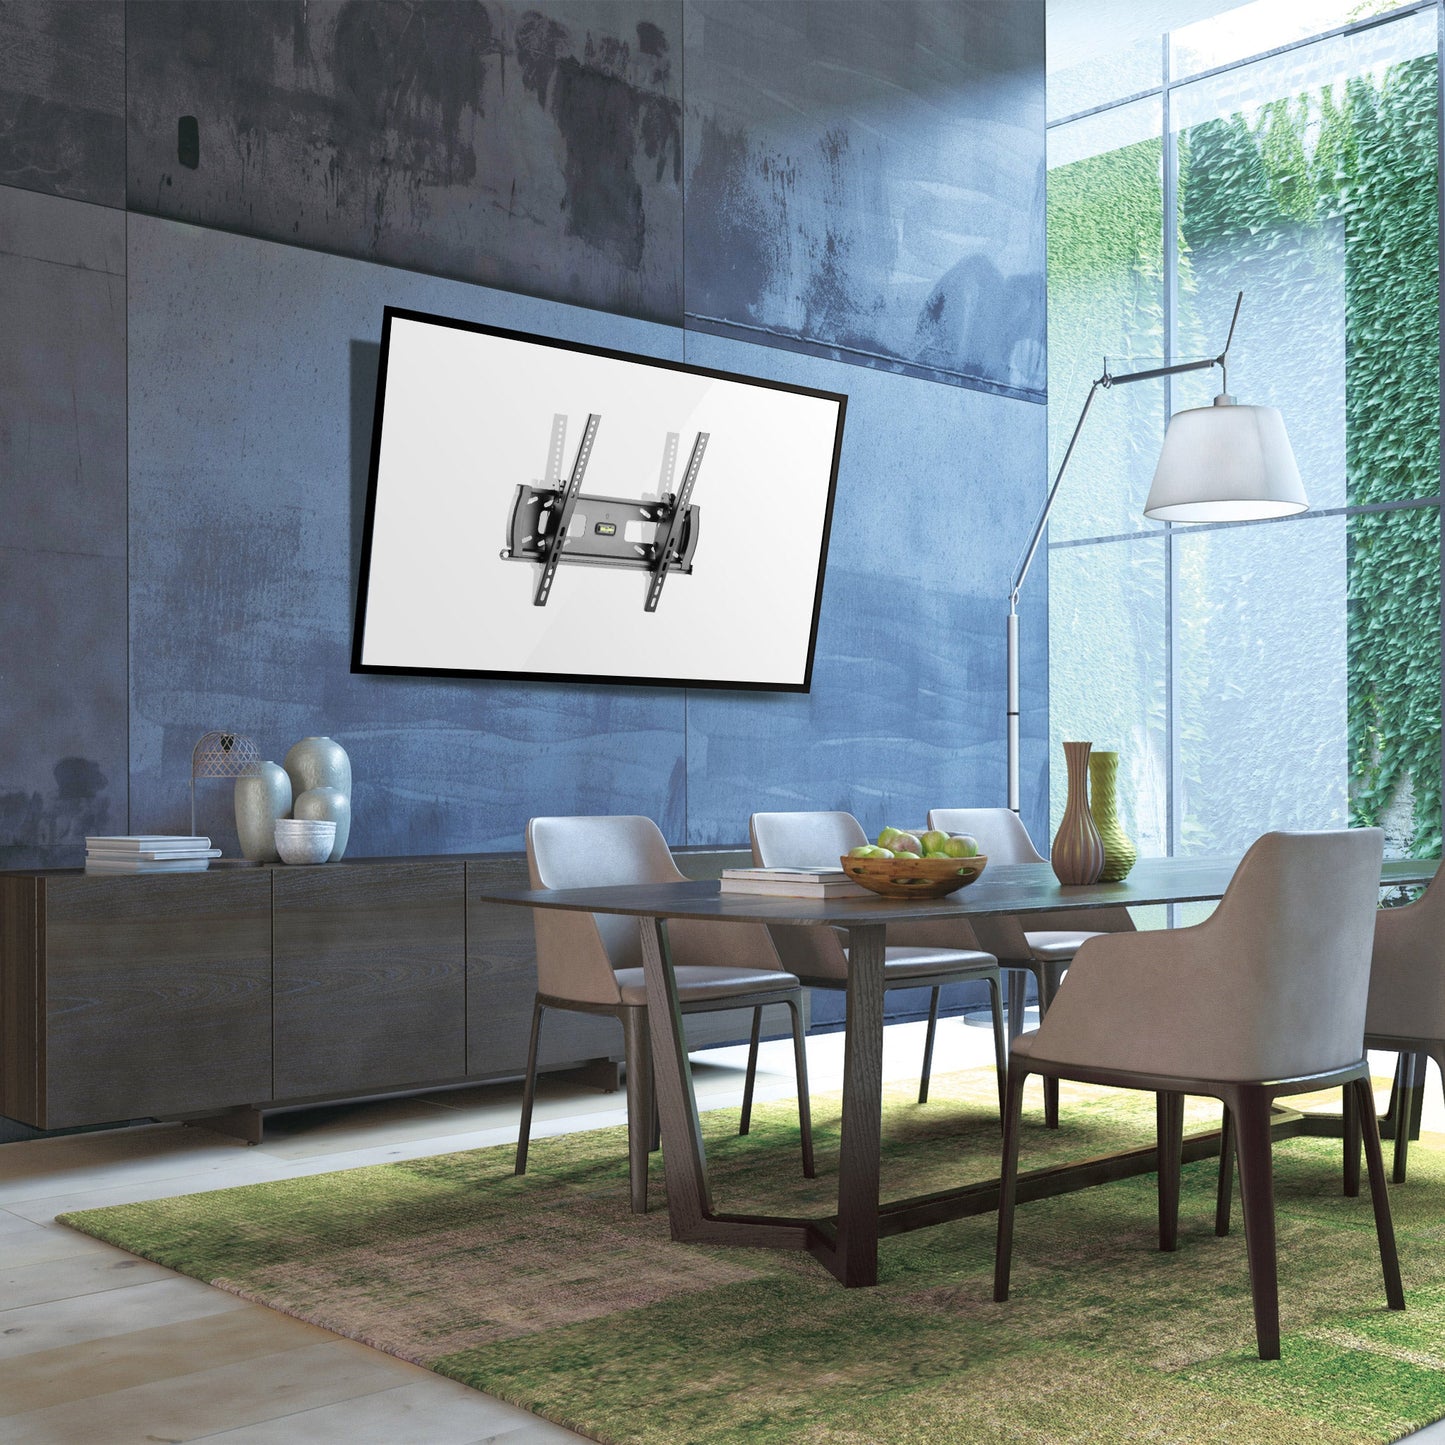 Medium Premium Tilt TV Wall Mount by Apex (AMT4401) freeshipping - One Products